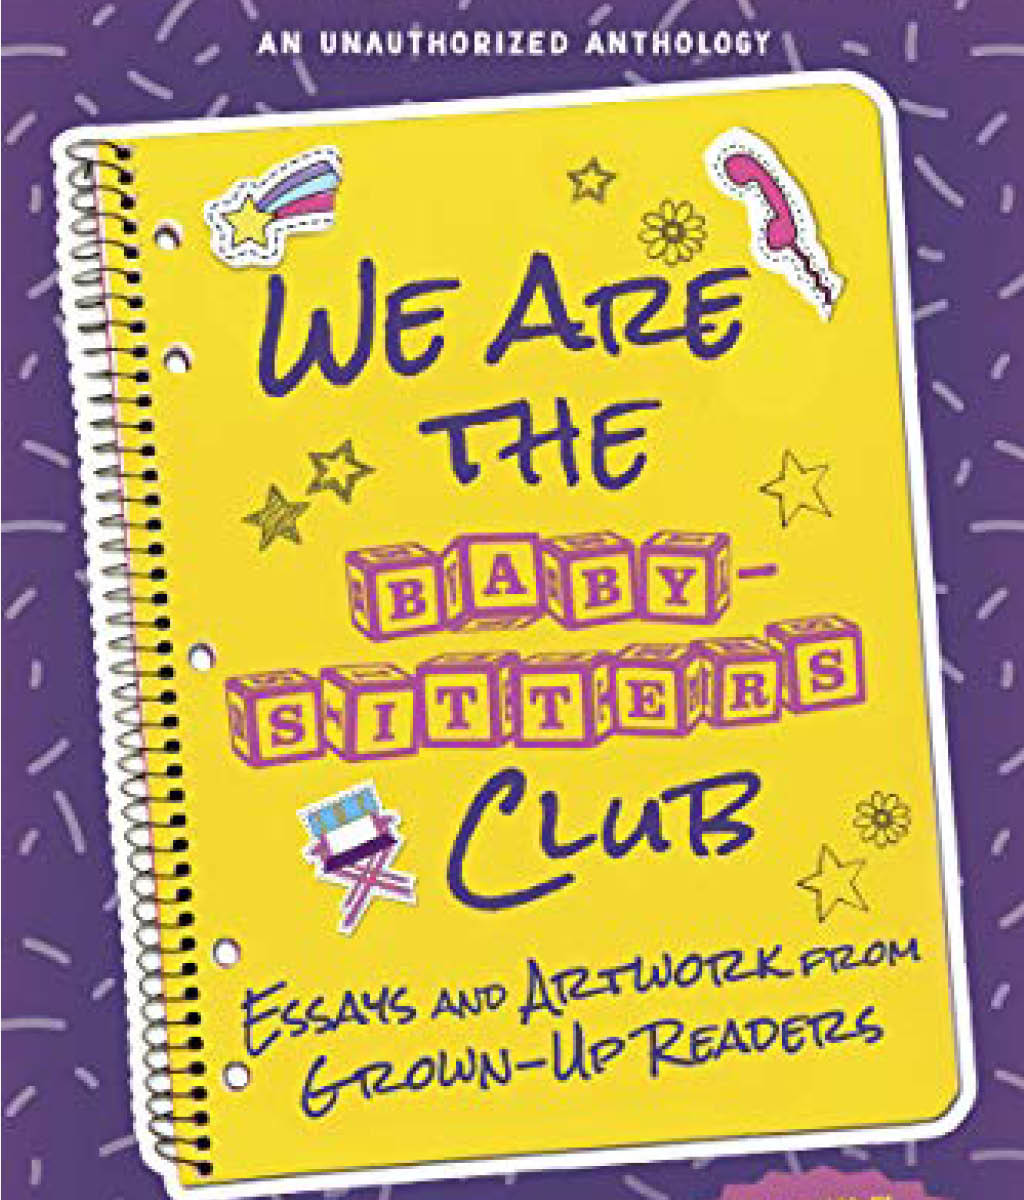 We Are the Baby-Sitters Club: Essays and Artwork from Grown-Up Readers by Mara Wilson